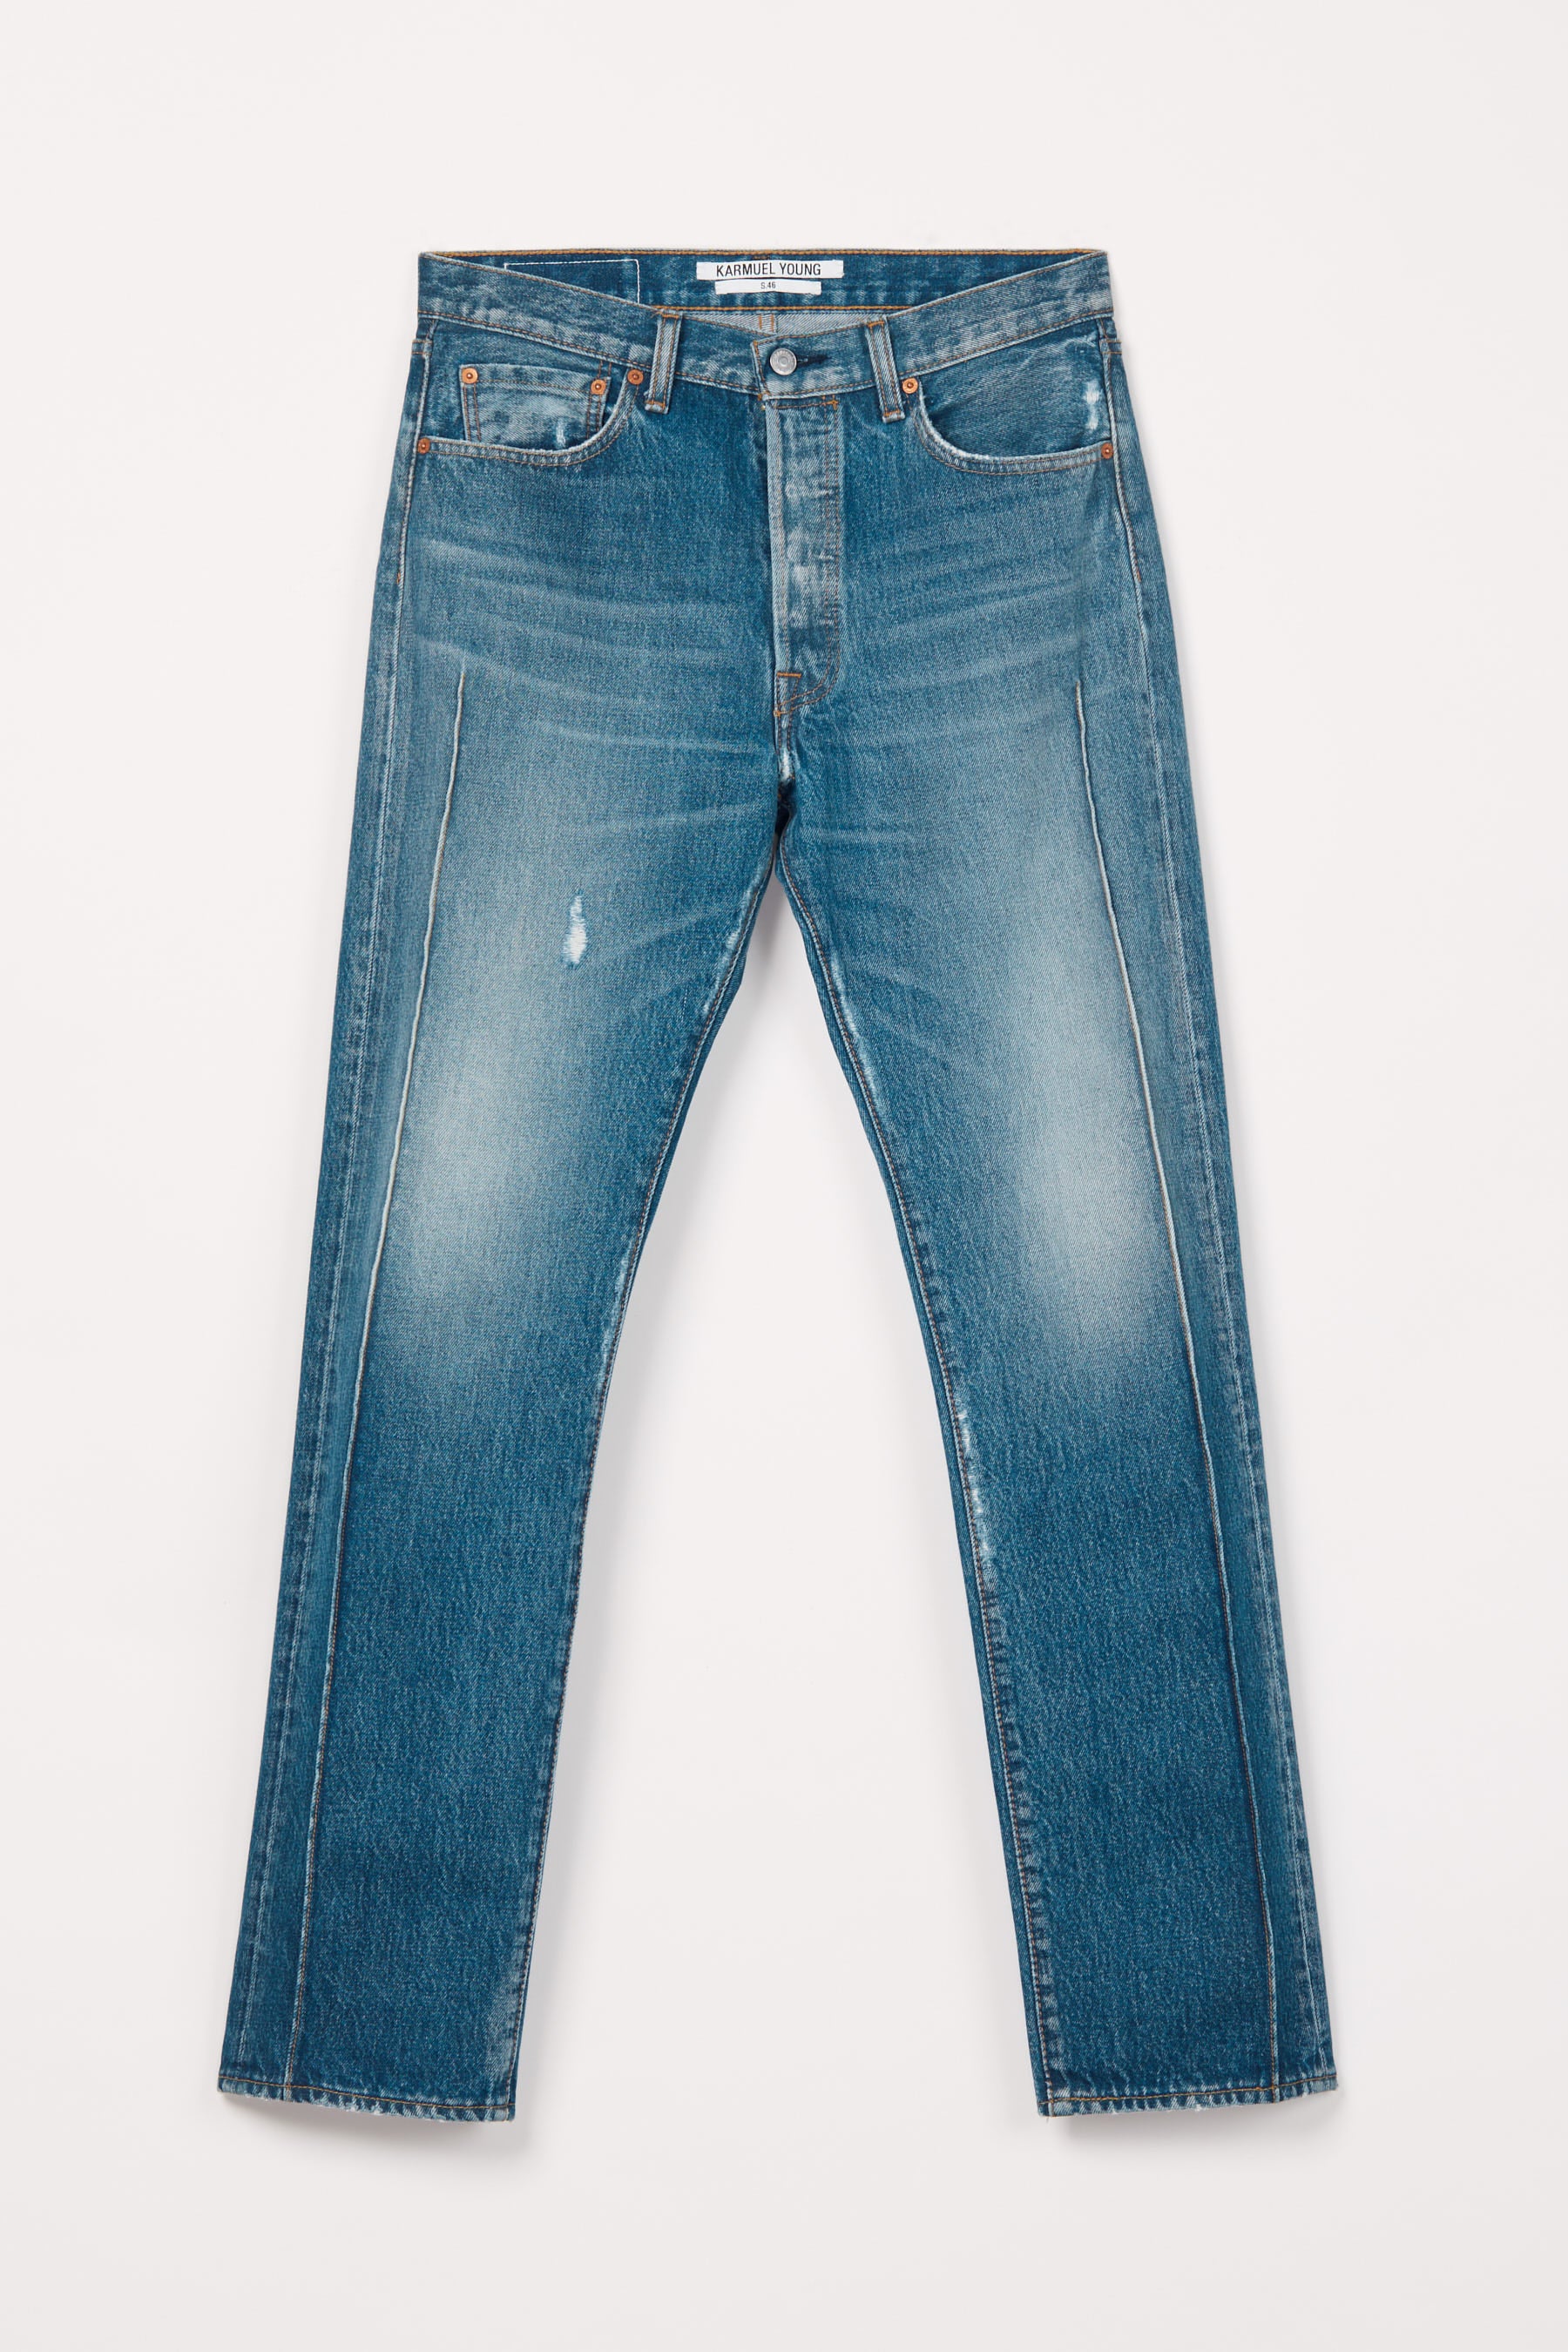 RE-edited Blue Washed Cuboid Levi's 501 jeans